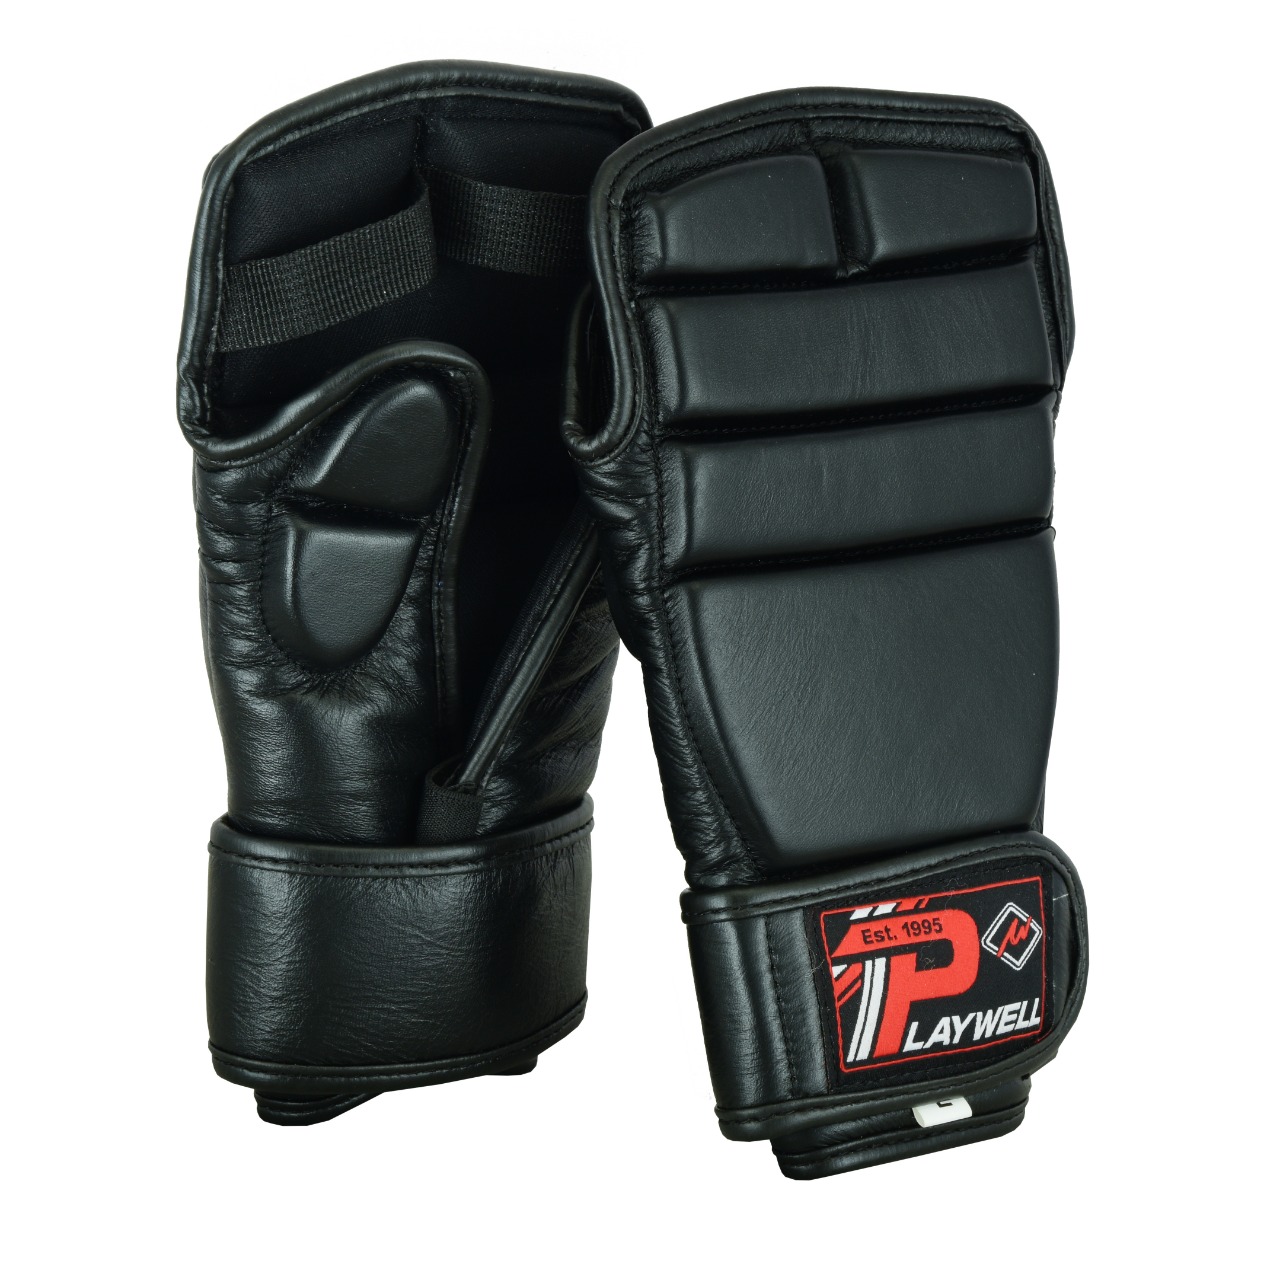 Full Contact leather Escrima Gloves - V2 - Click Image to Close